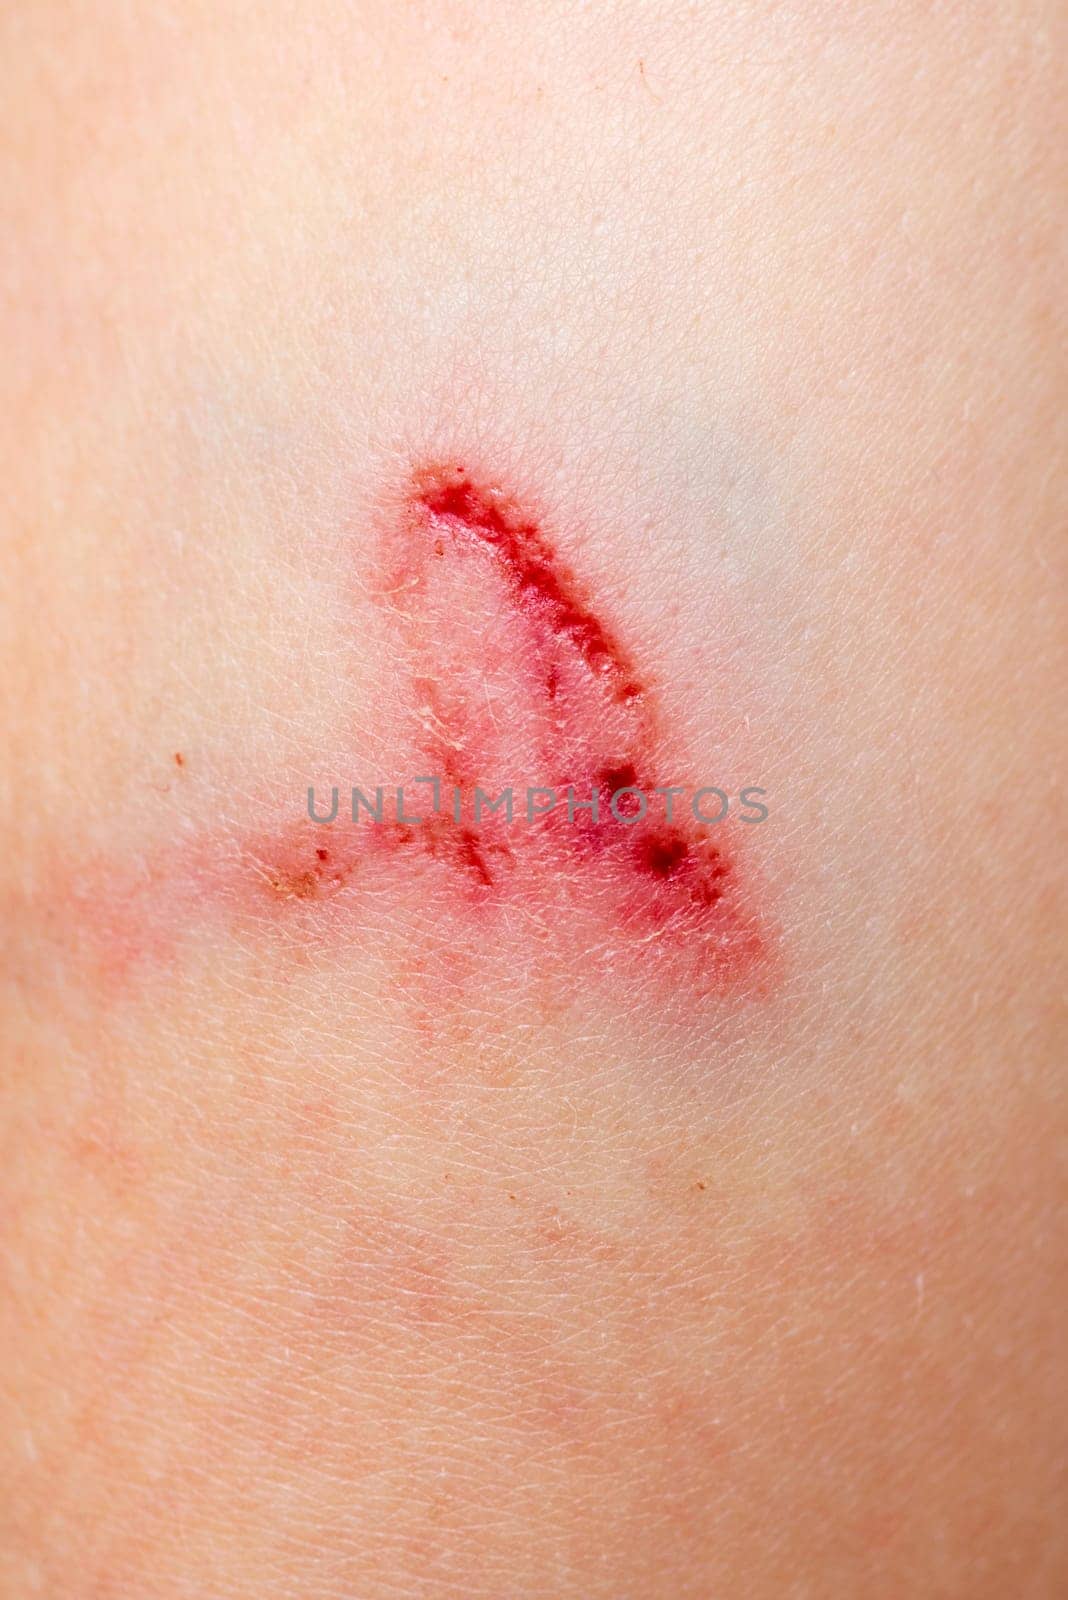 A wound on the human body, deep cut, scar closeup. Deep scratches on the skin with bruises.